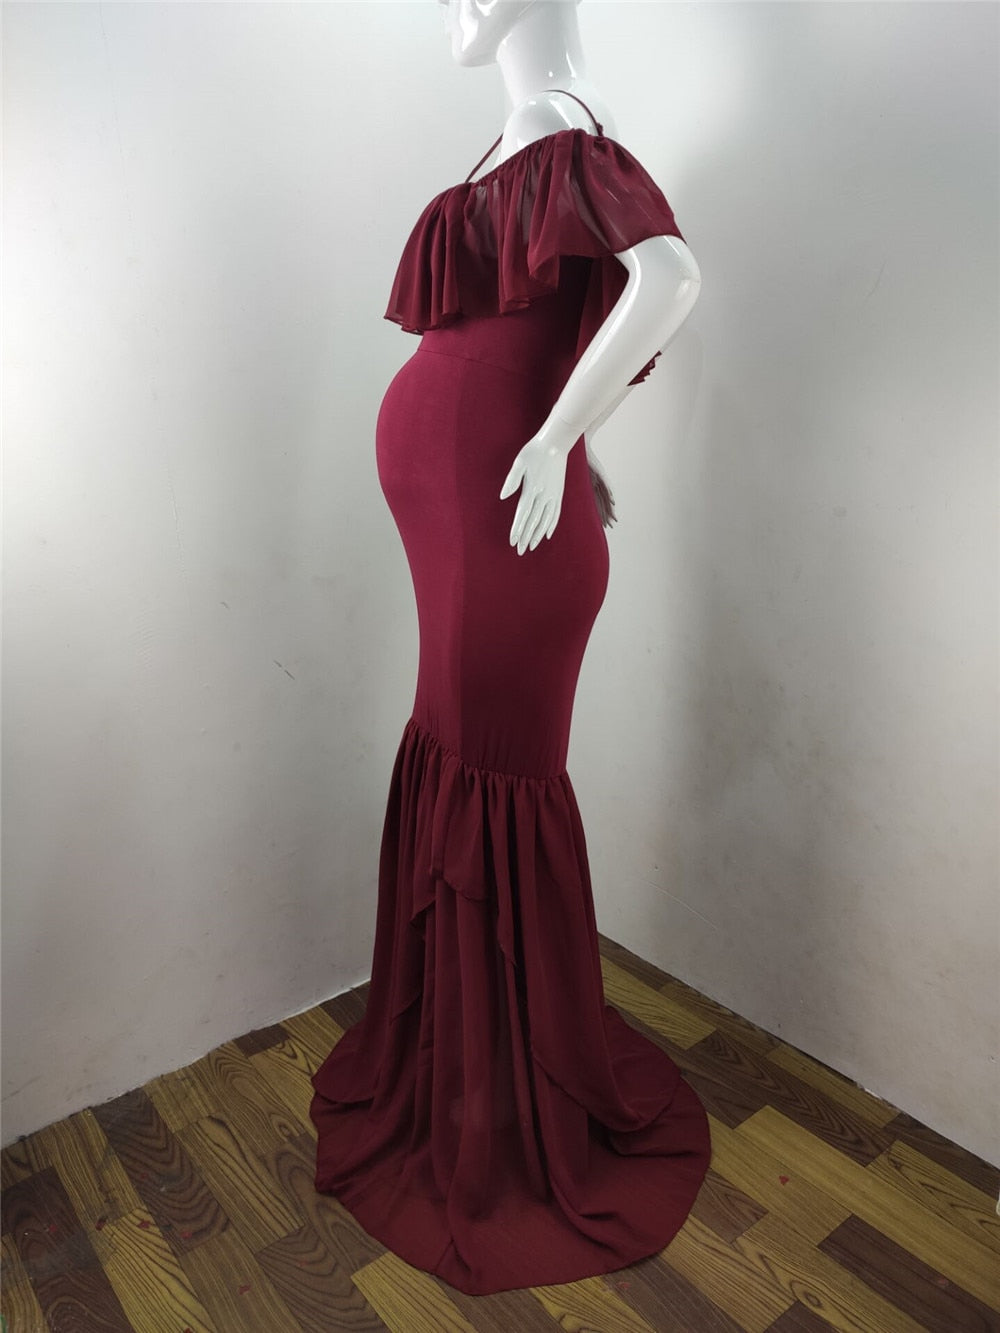 dress for mom-to-be